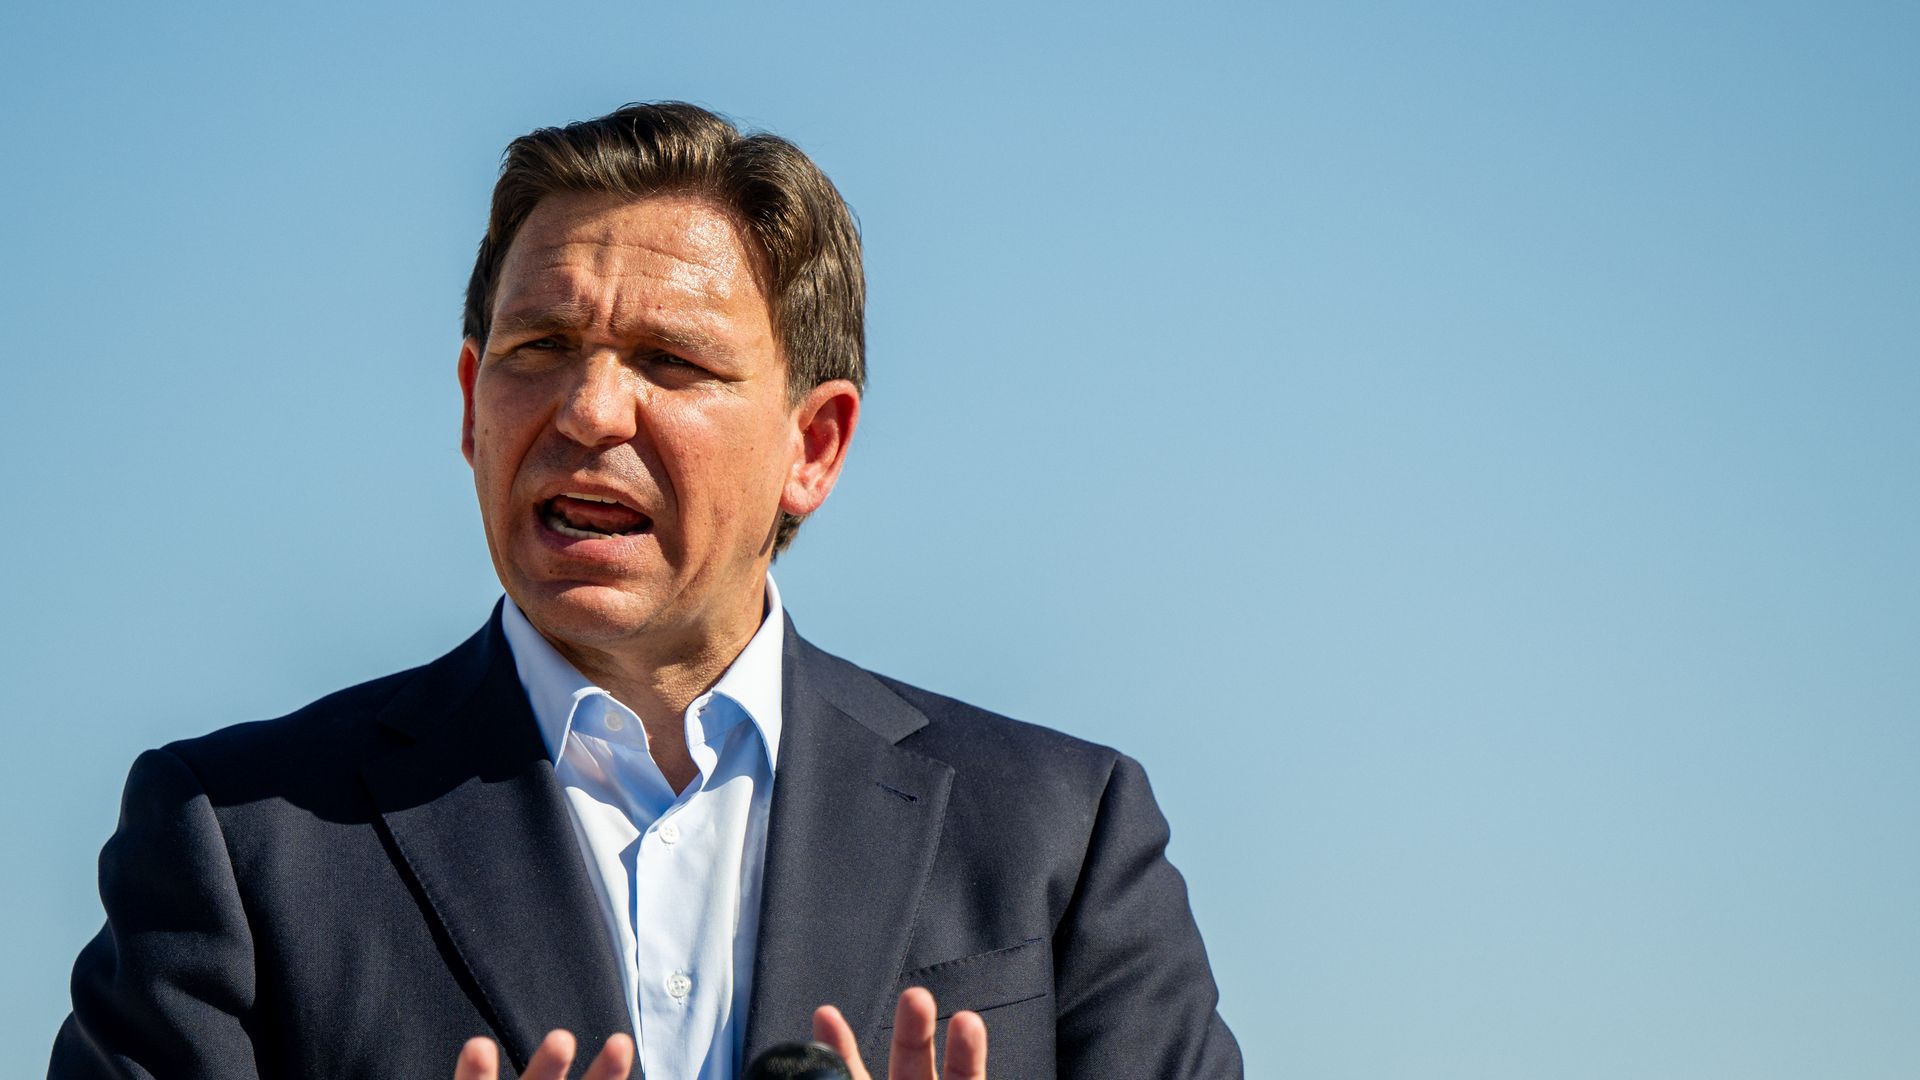 MIDLAND, TEXAS - SEPTEMBER 20: Florida Gov. Ron DeSantis speaks to members of the media and site workers at the Permian Deep Rock Oil Company site during a campaign event on September 20, 2023 in Midland, Texas